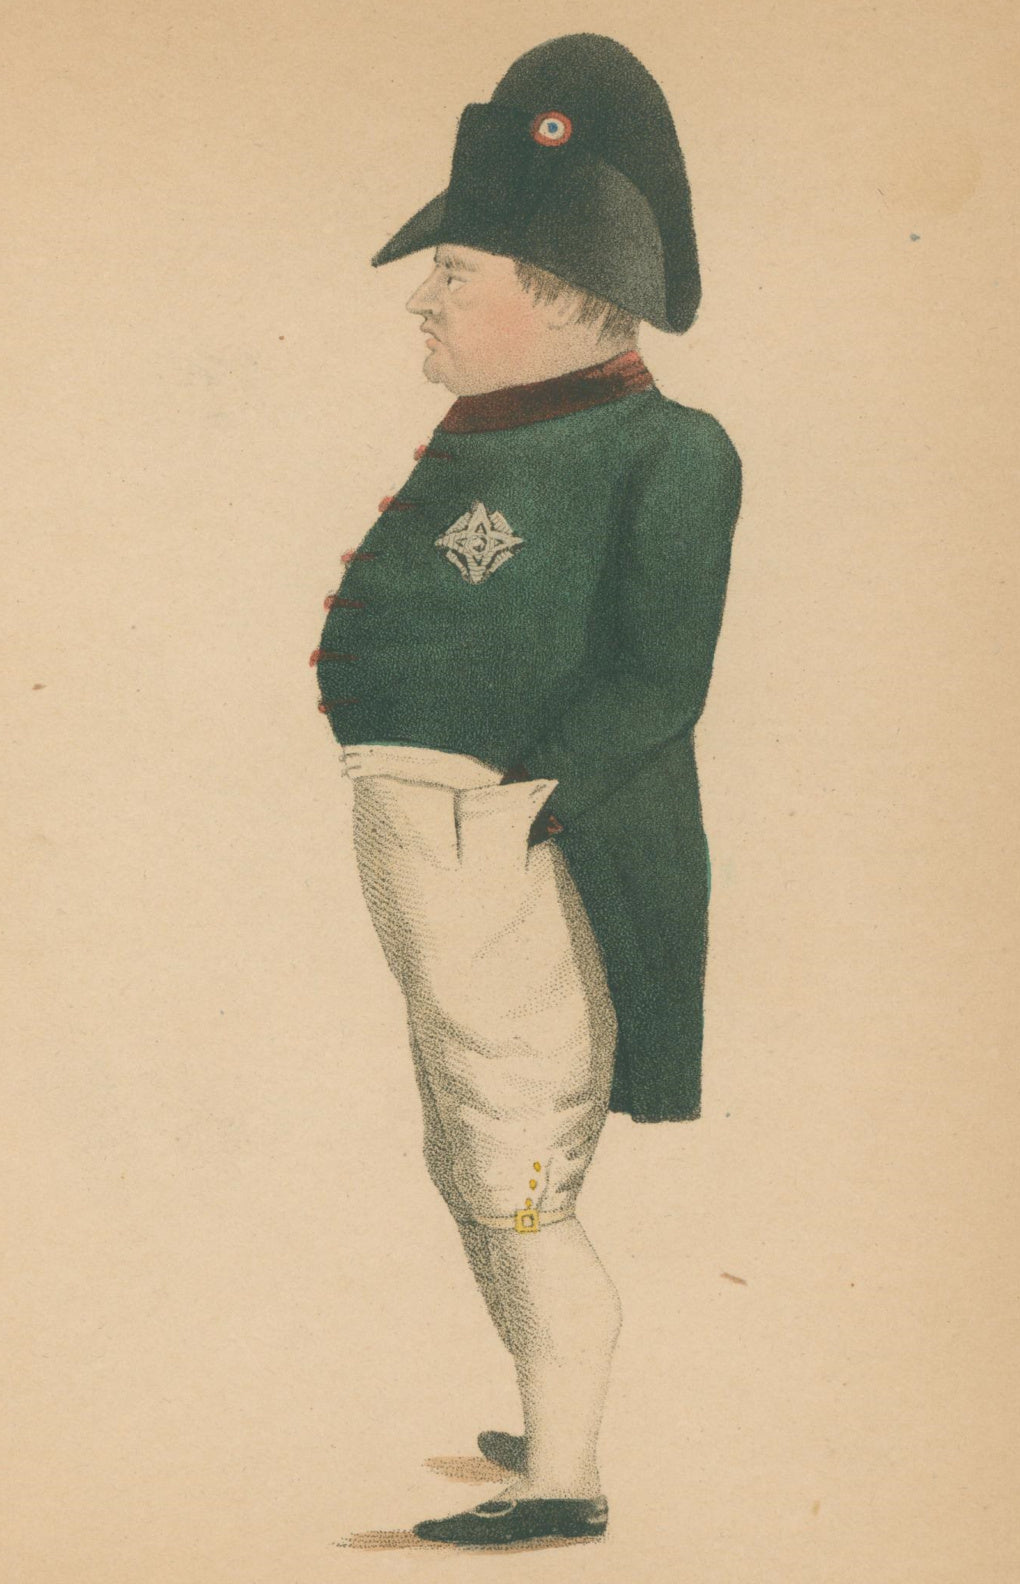 Unattributed  “Drawn by an Officer who accompanied him in the Northumberland to St. Helena, and remained with him at the Briars for some weeks.”  [Napoleon Bonaparte]